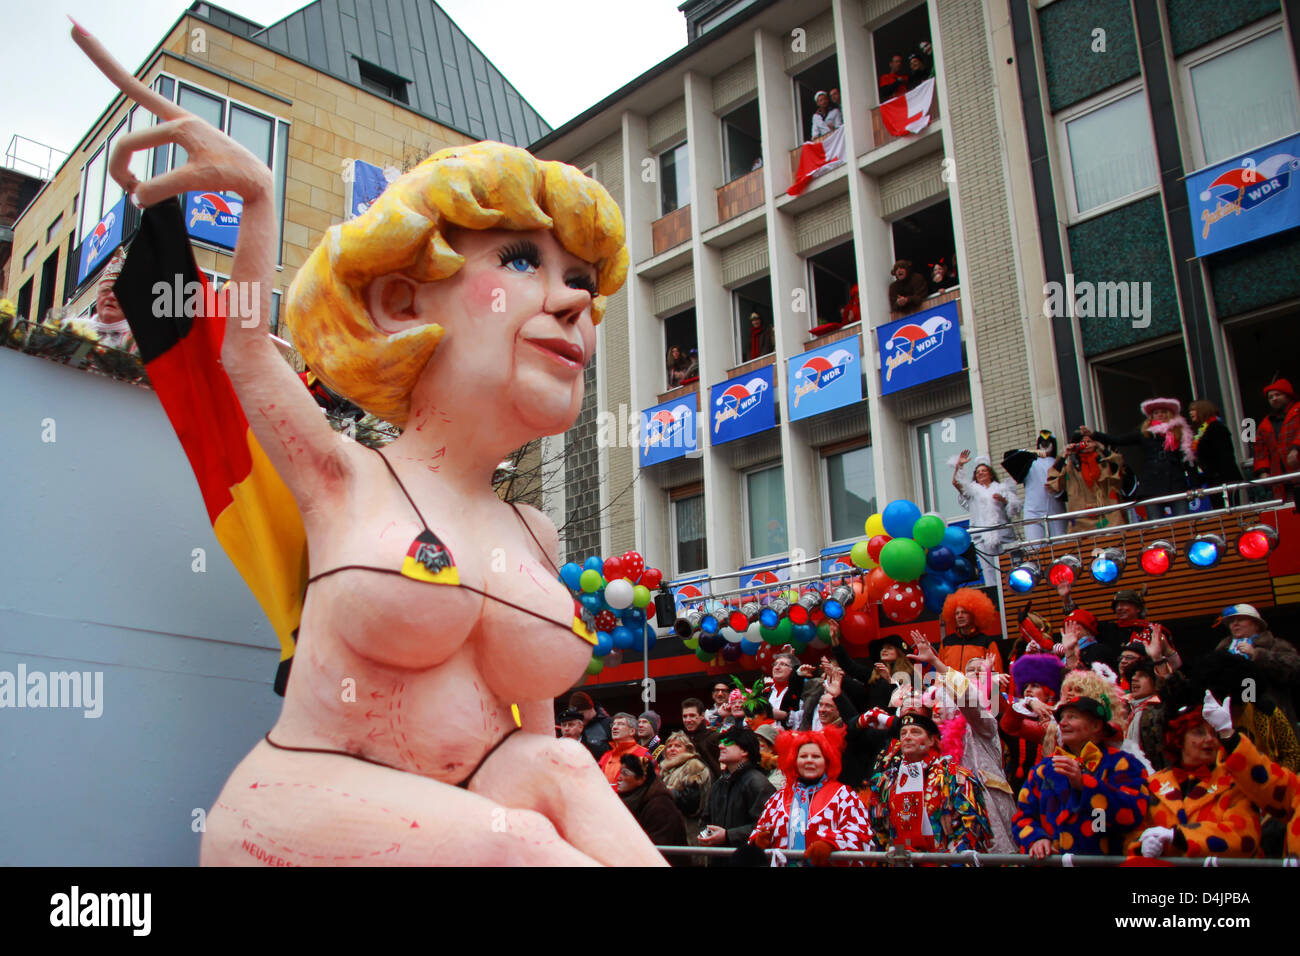 A float with an optically ?upgraded? version of German Chancellor Merkel is paraded through the streets on Shrove Monday in Cologne, Germany, 23 February 2009. On Shrove Monday tens of thousands carnival goers celebrate in the streets of Duesseldorf, Cologne and other carnival strongholds. Photo: Rolf Vennenbernd Stock Photo